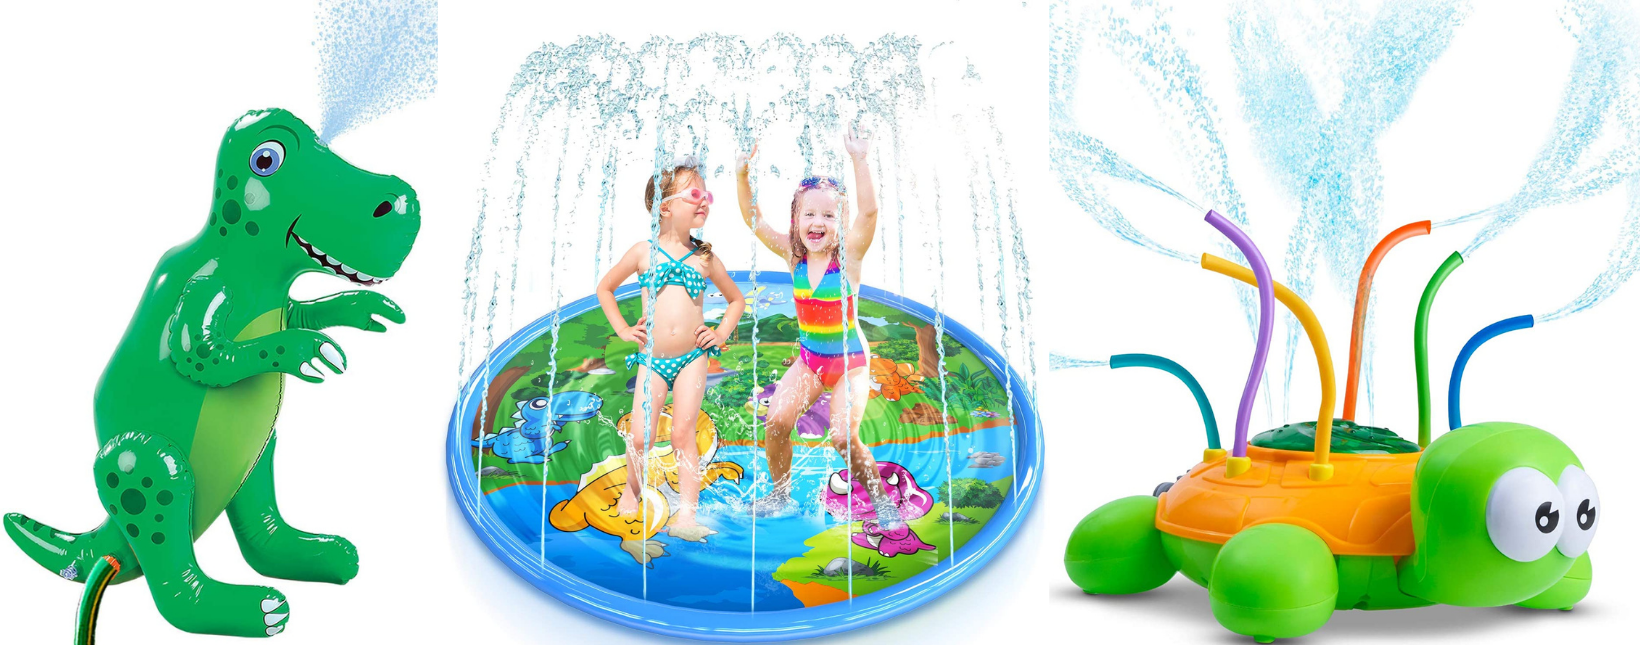 10 water sprinklers for kids that'll bring the fun this summer